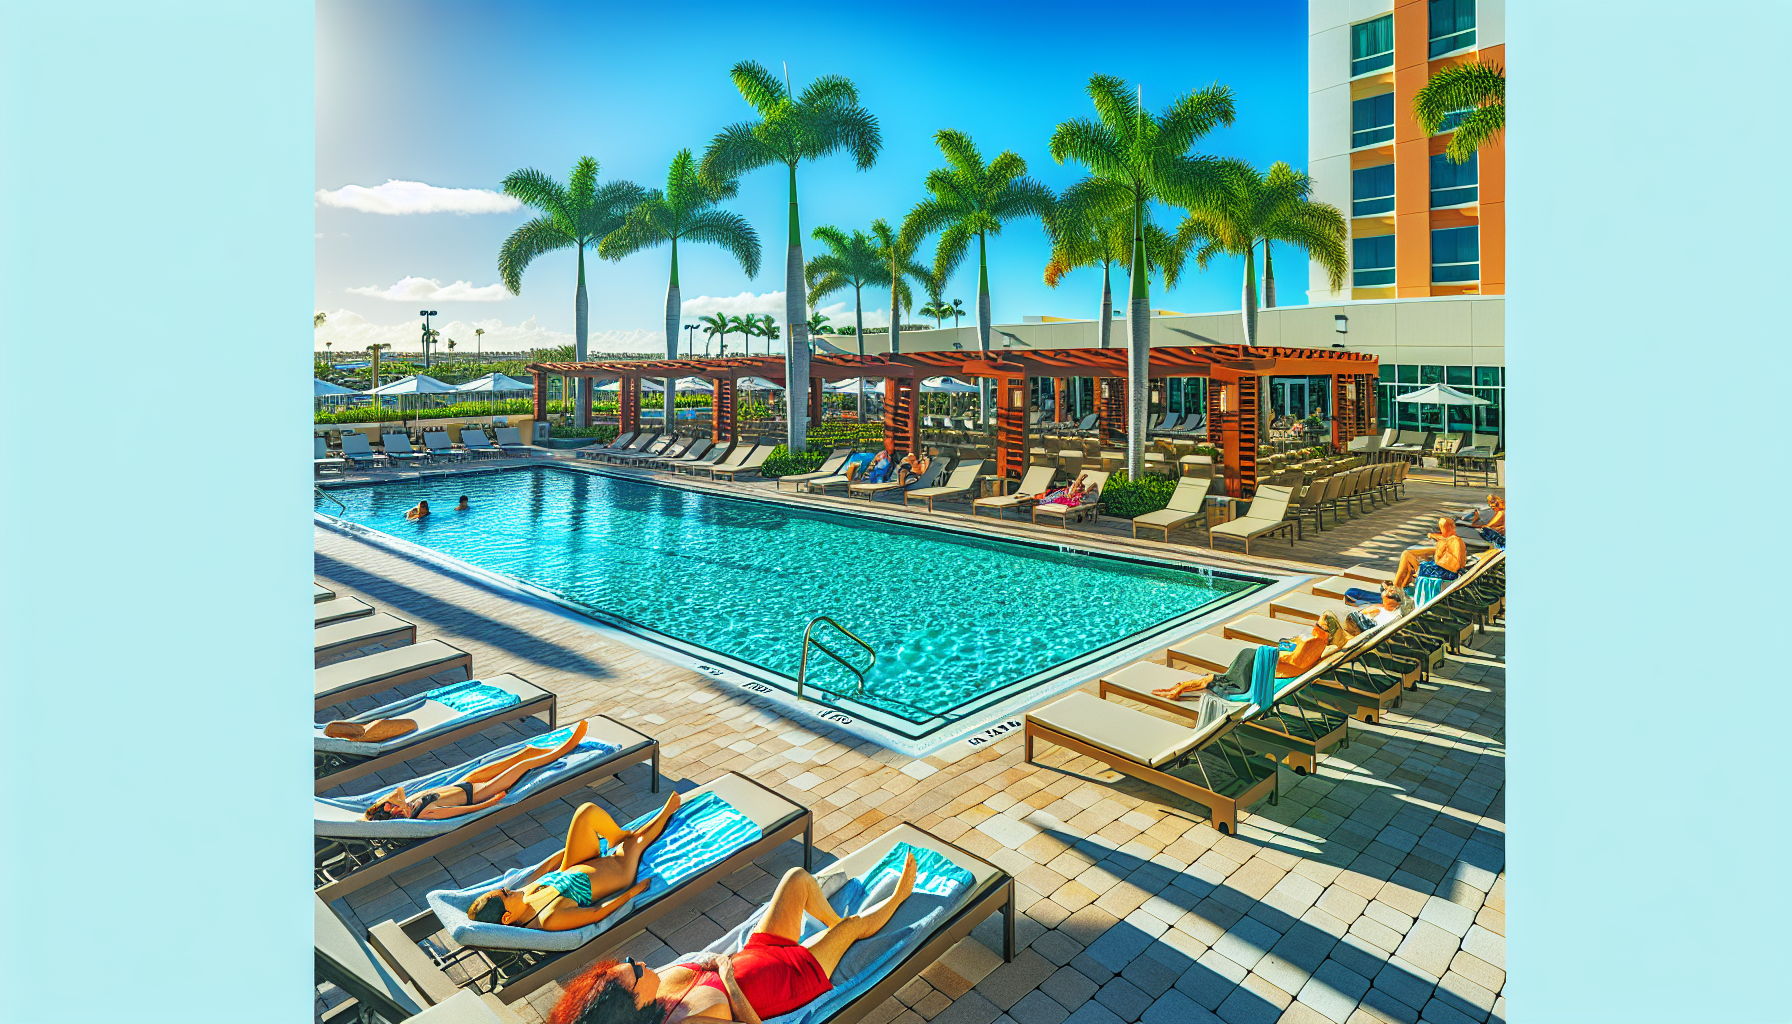 Relaxing outdoor pool at Marriott hotel near Fort Lauderdale airport